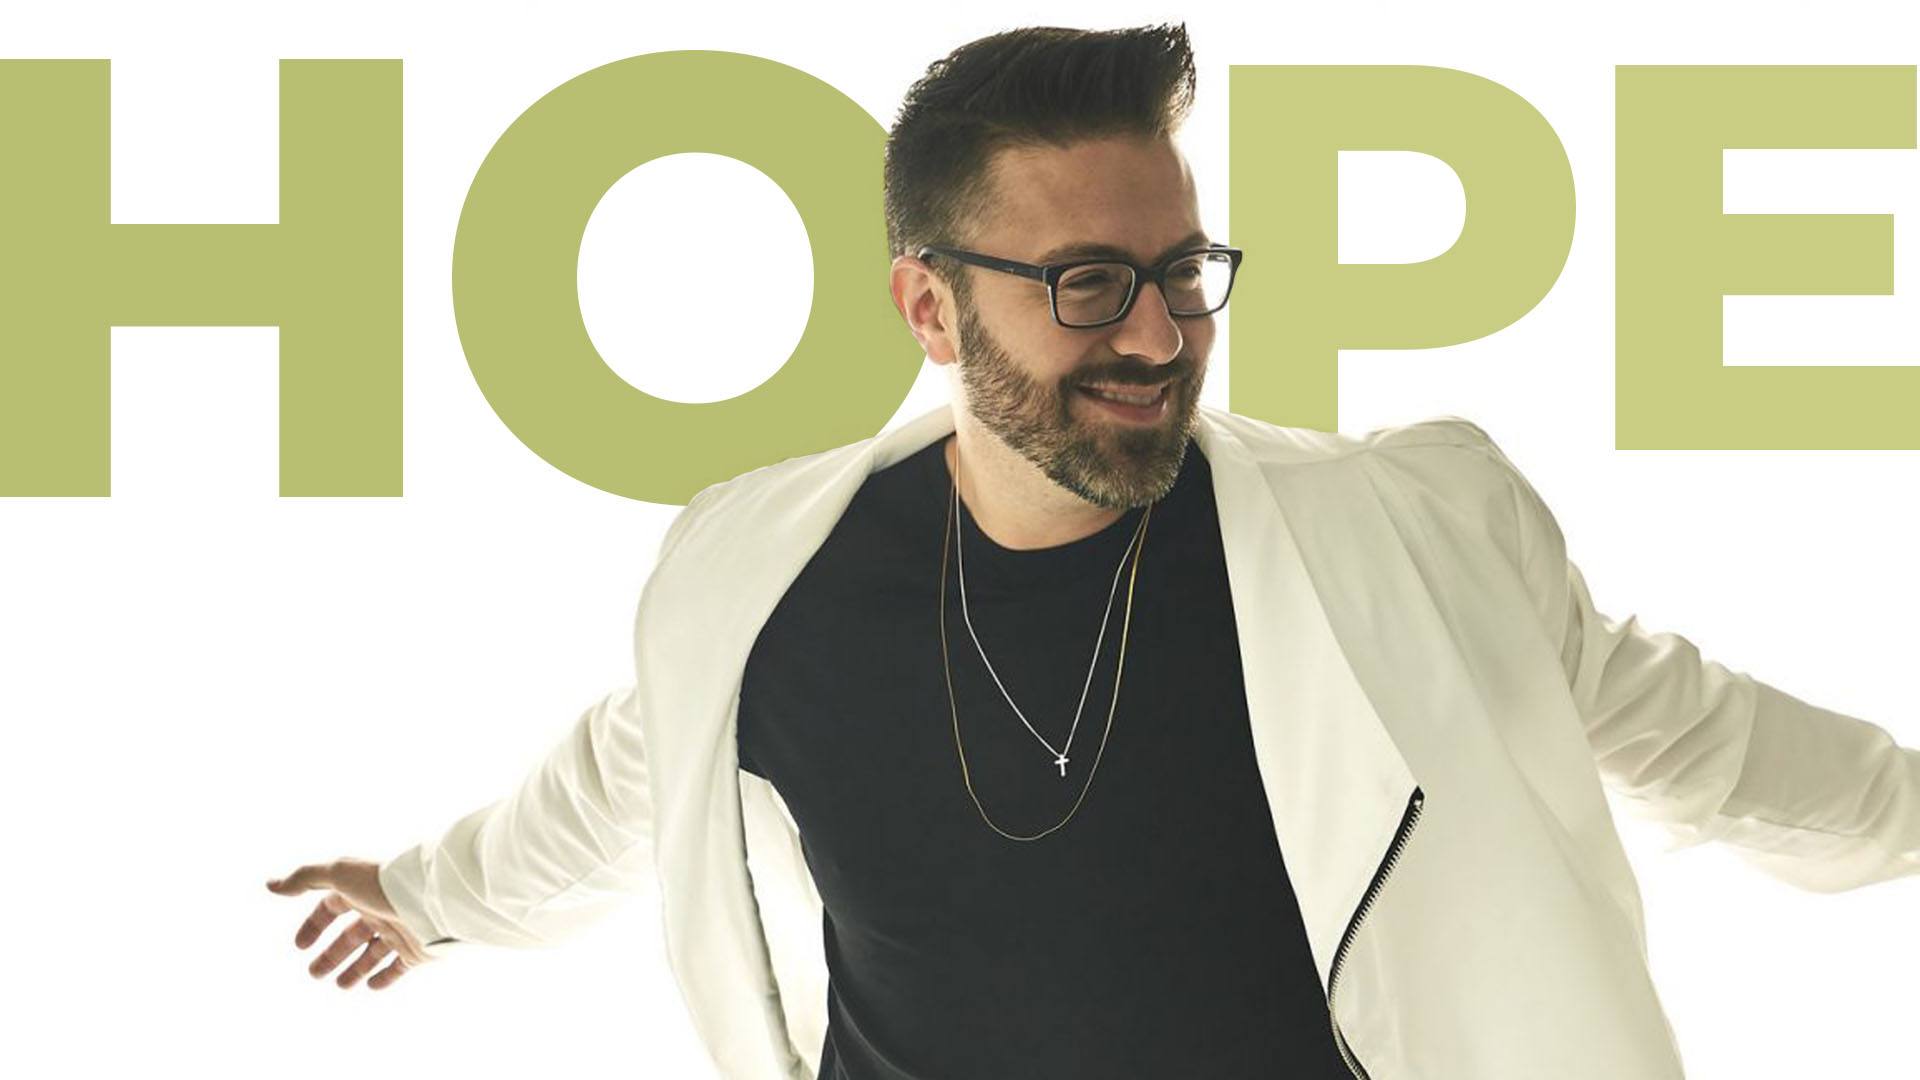 Danny Gokey and Kirk Cameron talk about HOPE